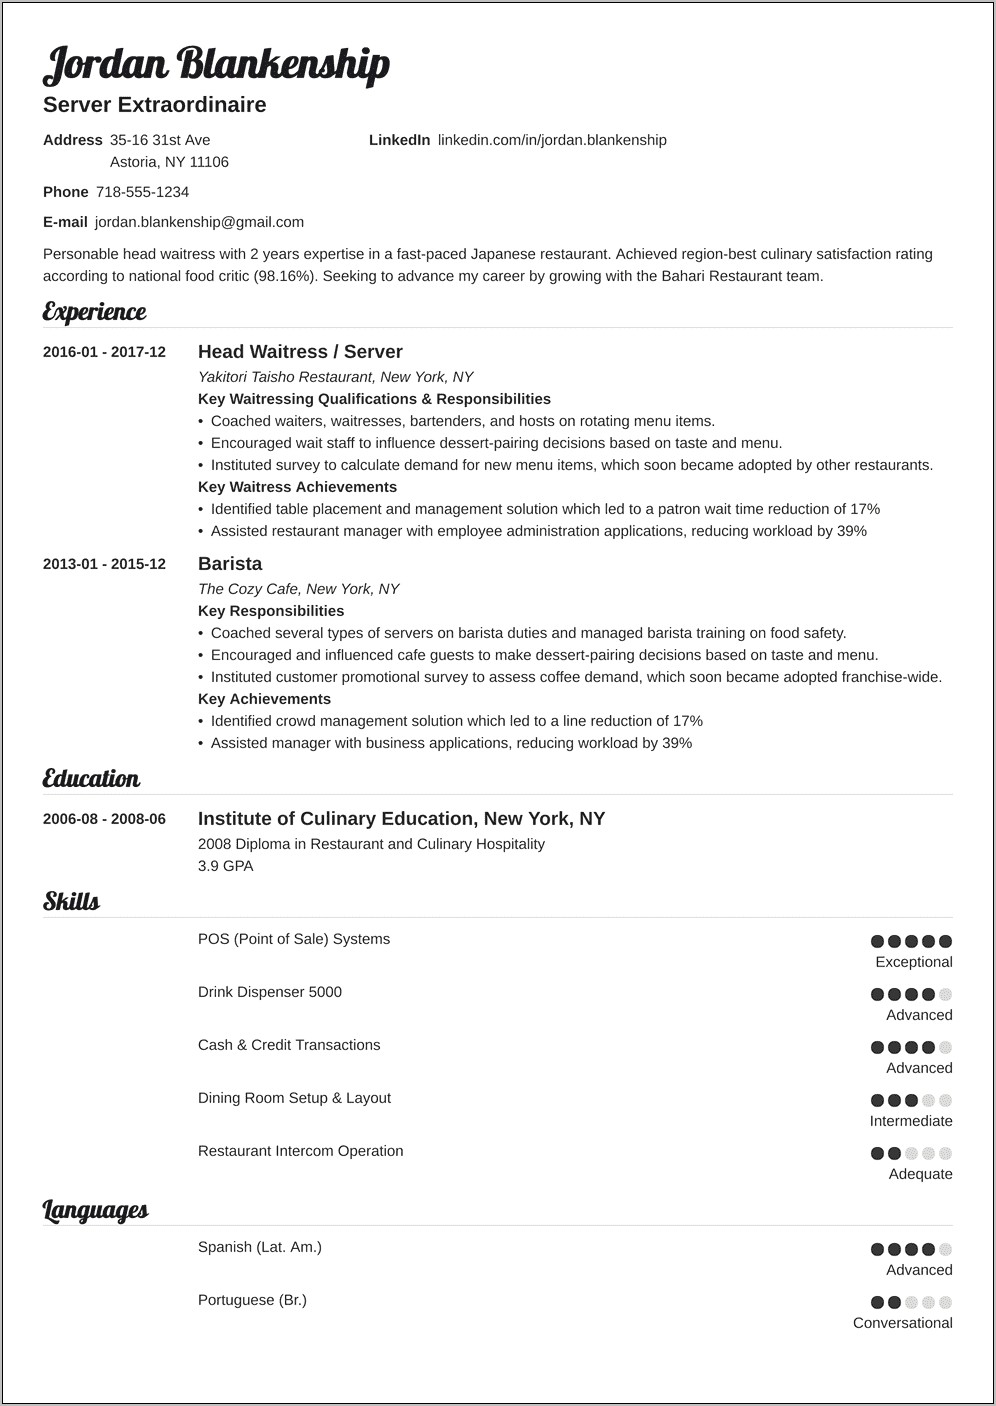 Sample Resume Objective Statement For Food Service